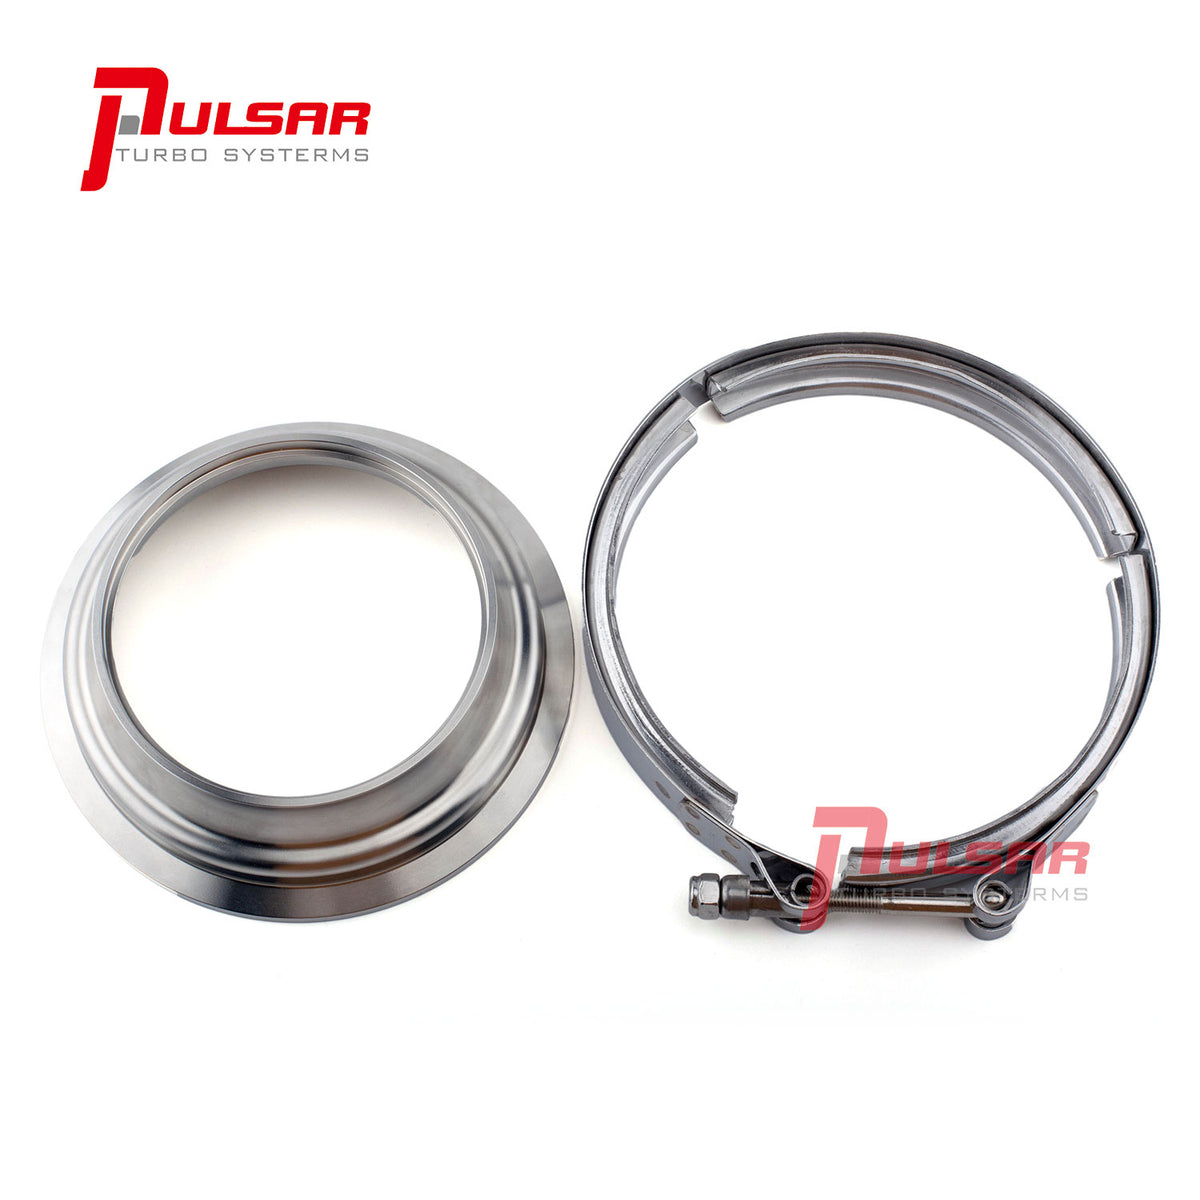 PULSAR S400 T6 Turbo 5" to 4" inch Stainless Steel Flange Clamp Kit